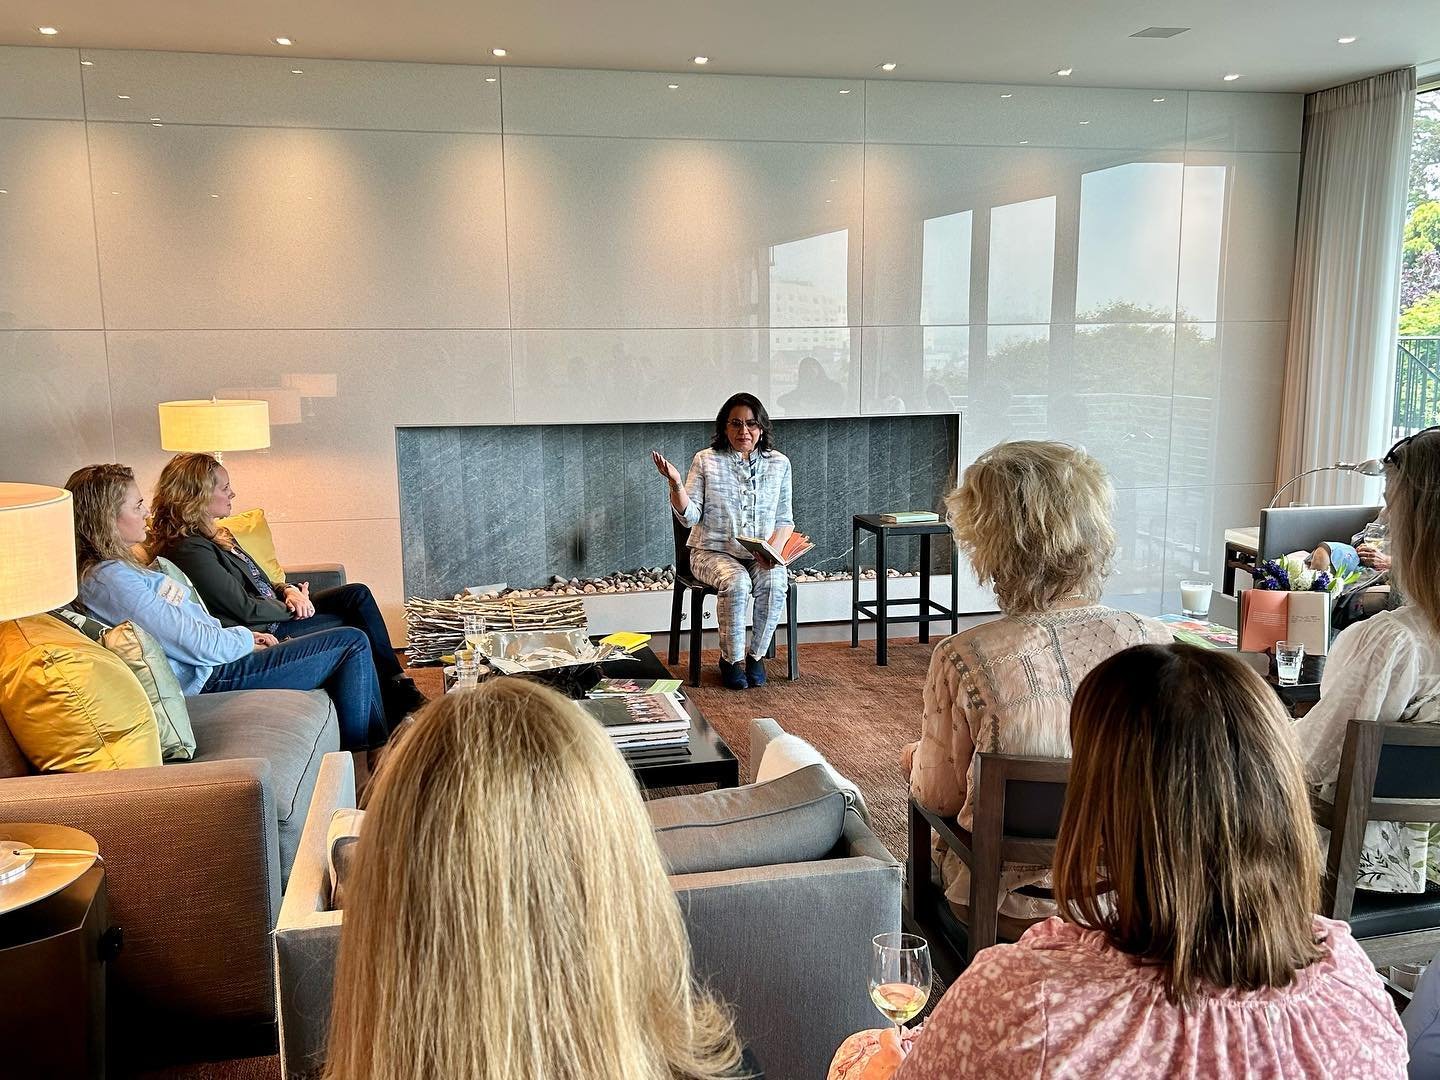 Amazing to launch &quot;BenchTalk: Wisdoms Inspired in Nature&quot; in the Bay Area with Alden Stoner -- what a beautiful, inspiring event in the most serene, stunning setting. Grateful to Nature Sacred and to our hosts for their hospitality and for 